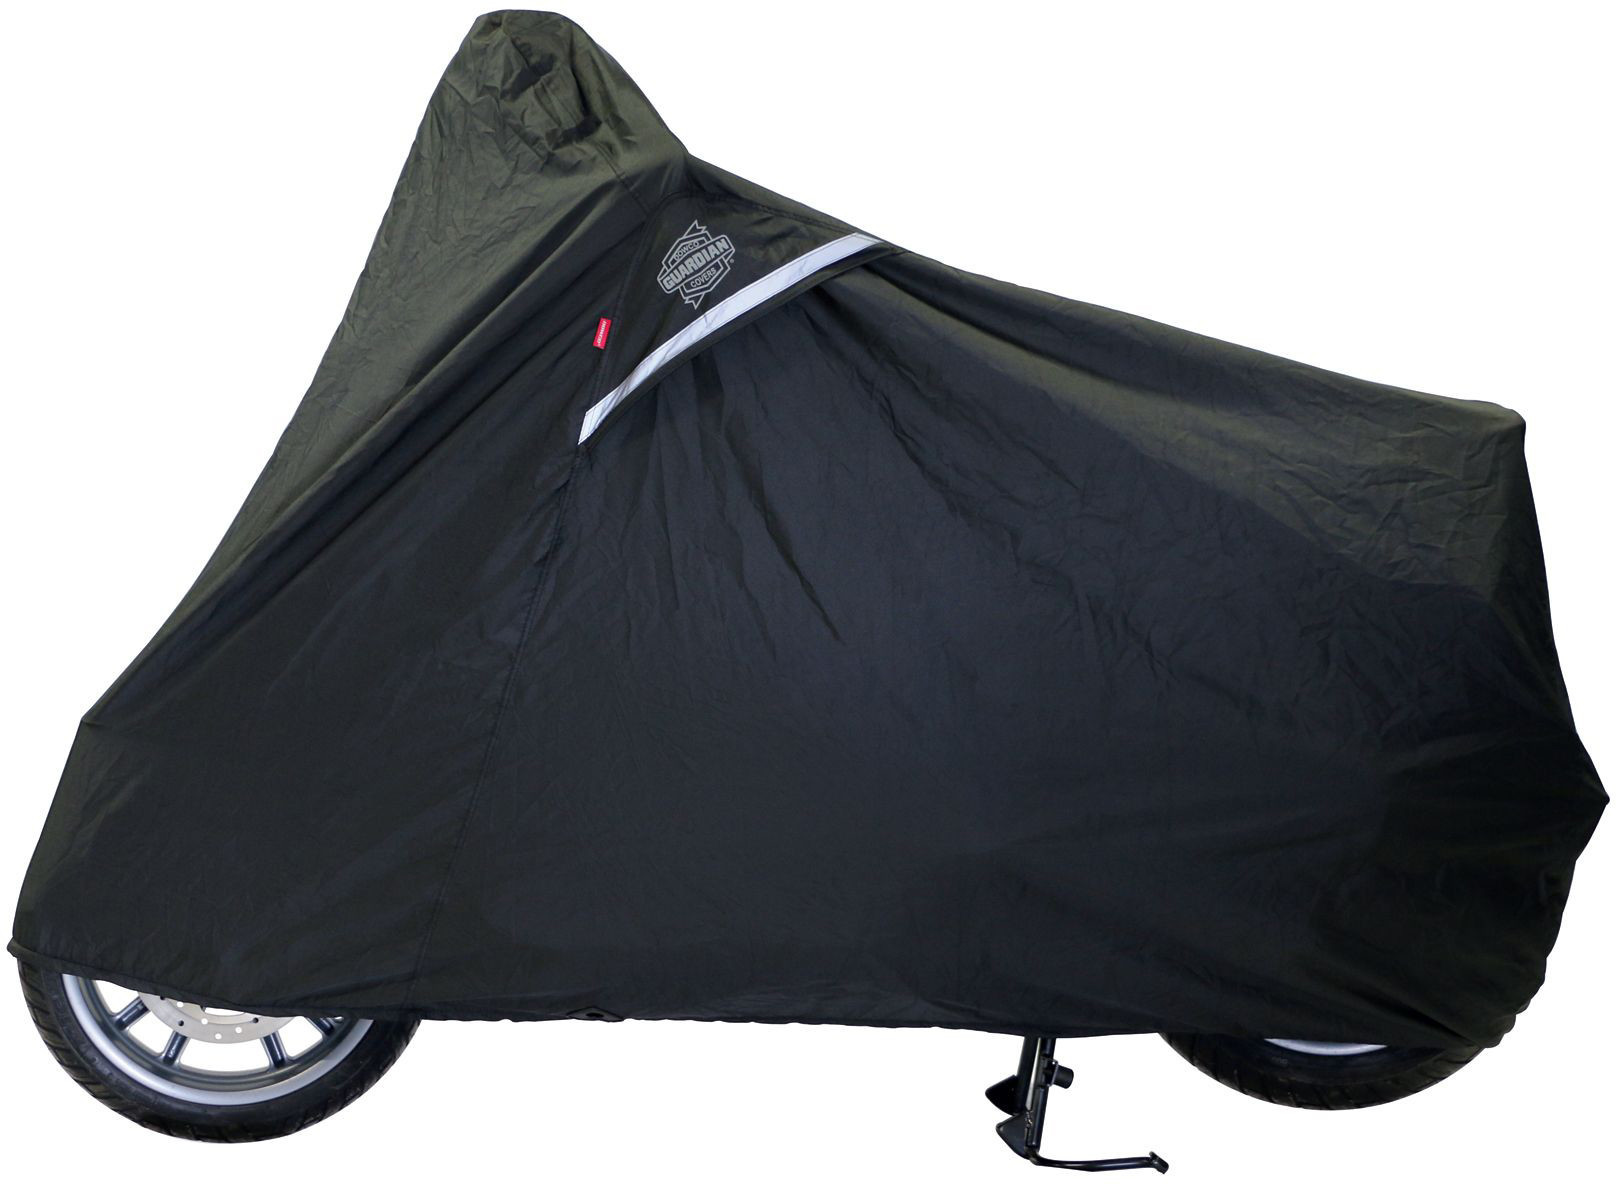 Dowco - Cover Weatherall Plus Scooter Md Black - 50031-00